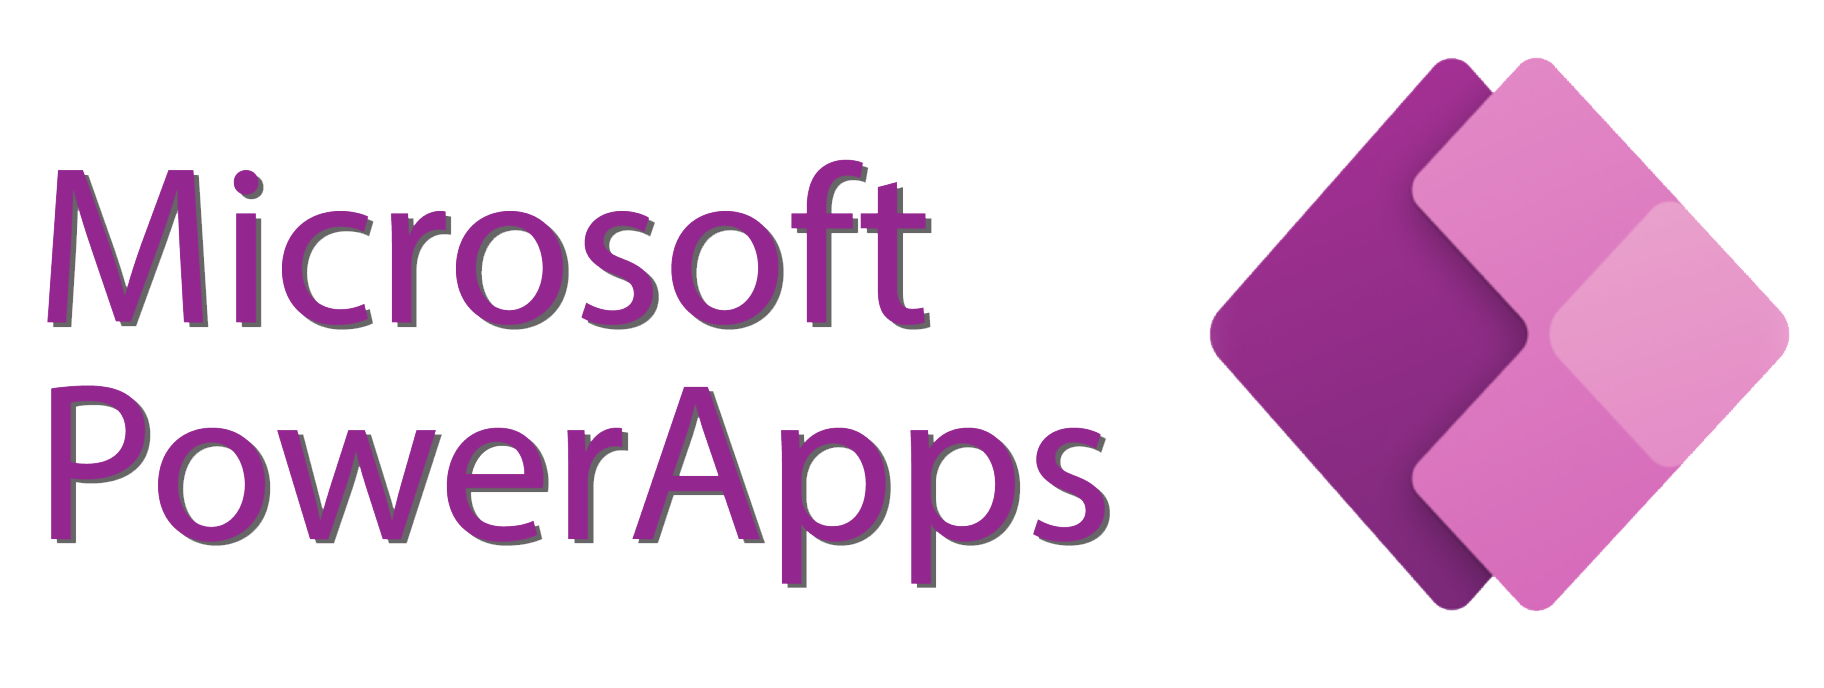 /posts/dataversechoices-sqlbackend/powerapps-logo.png